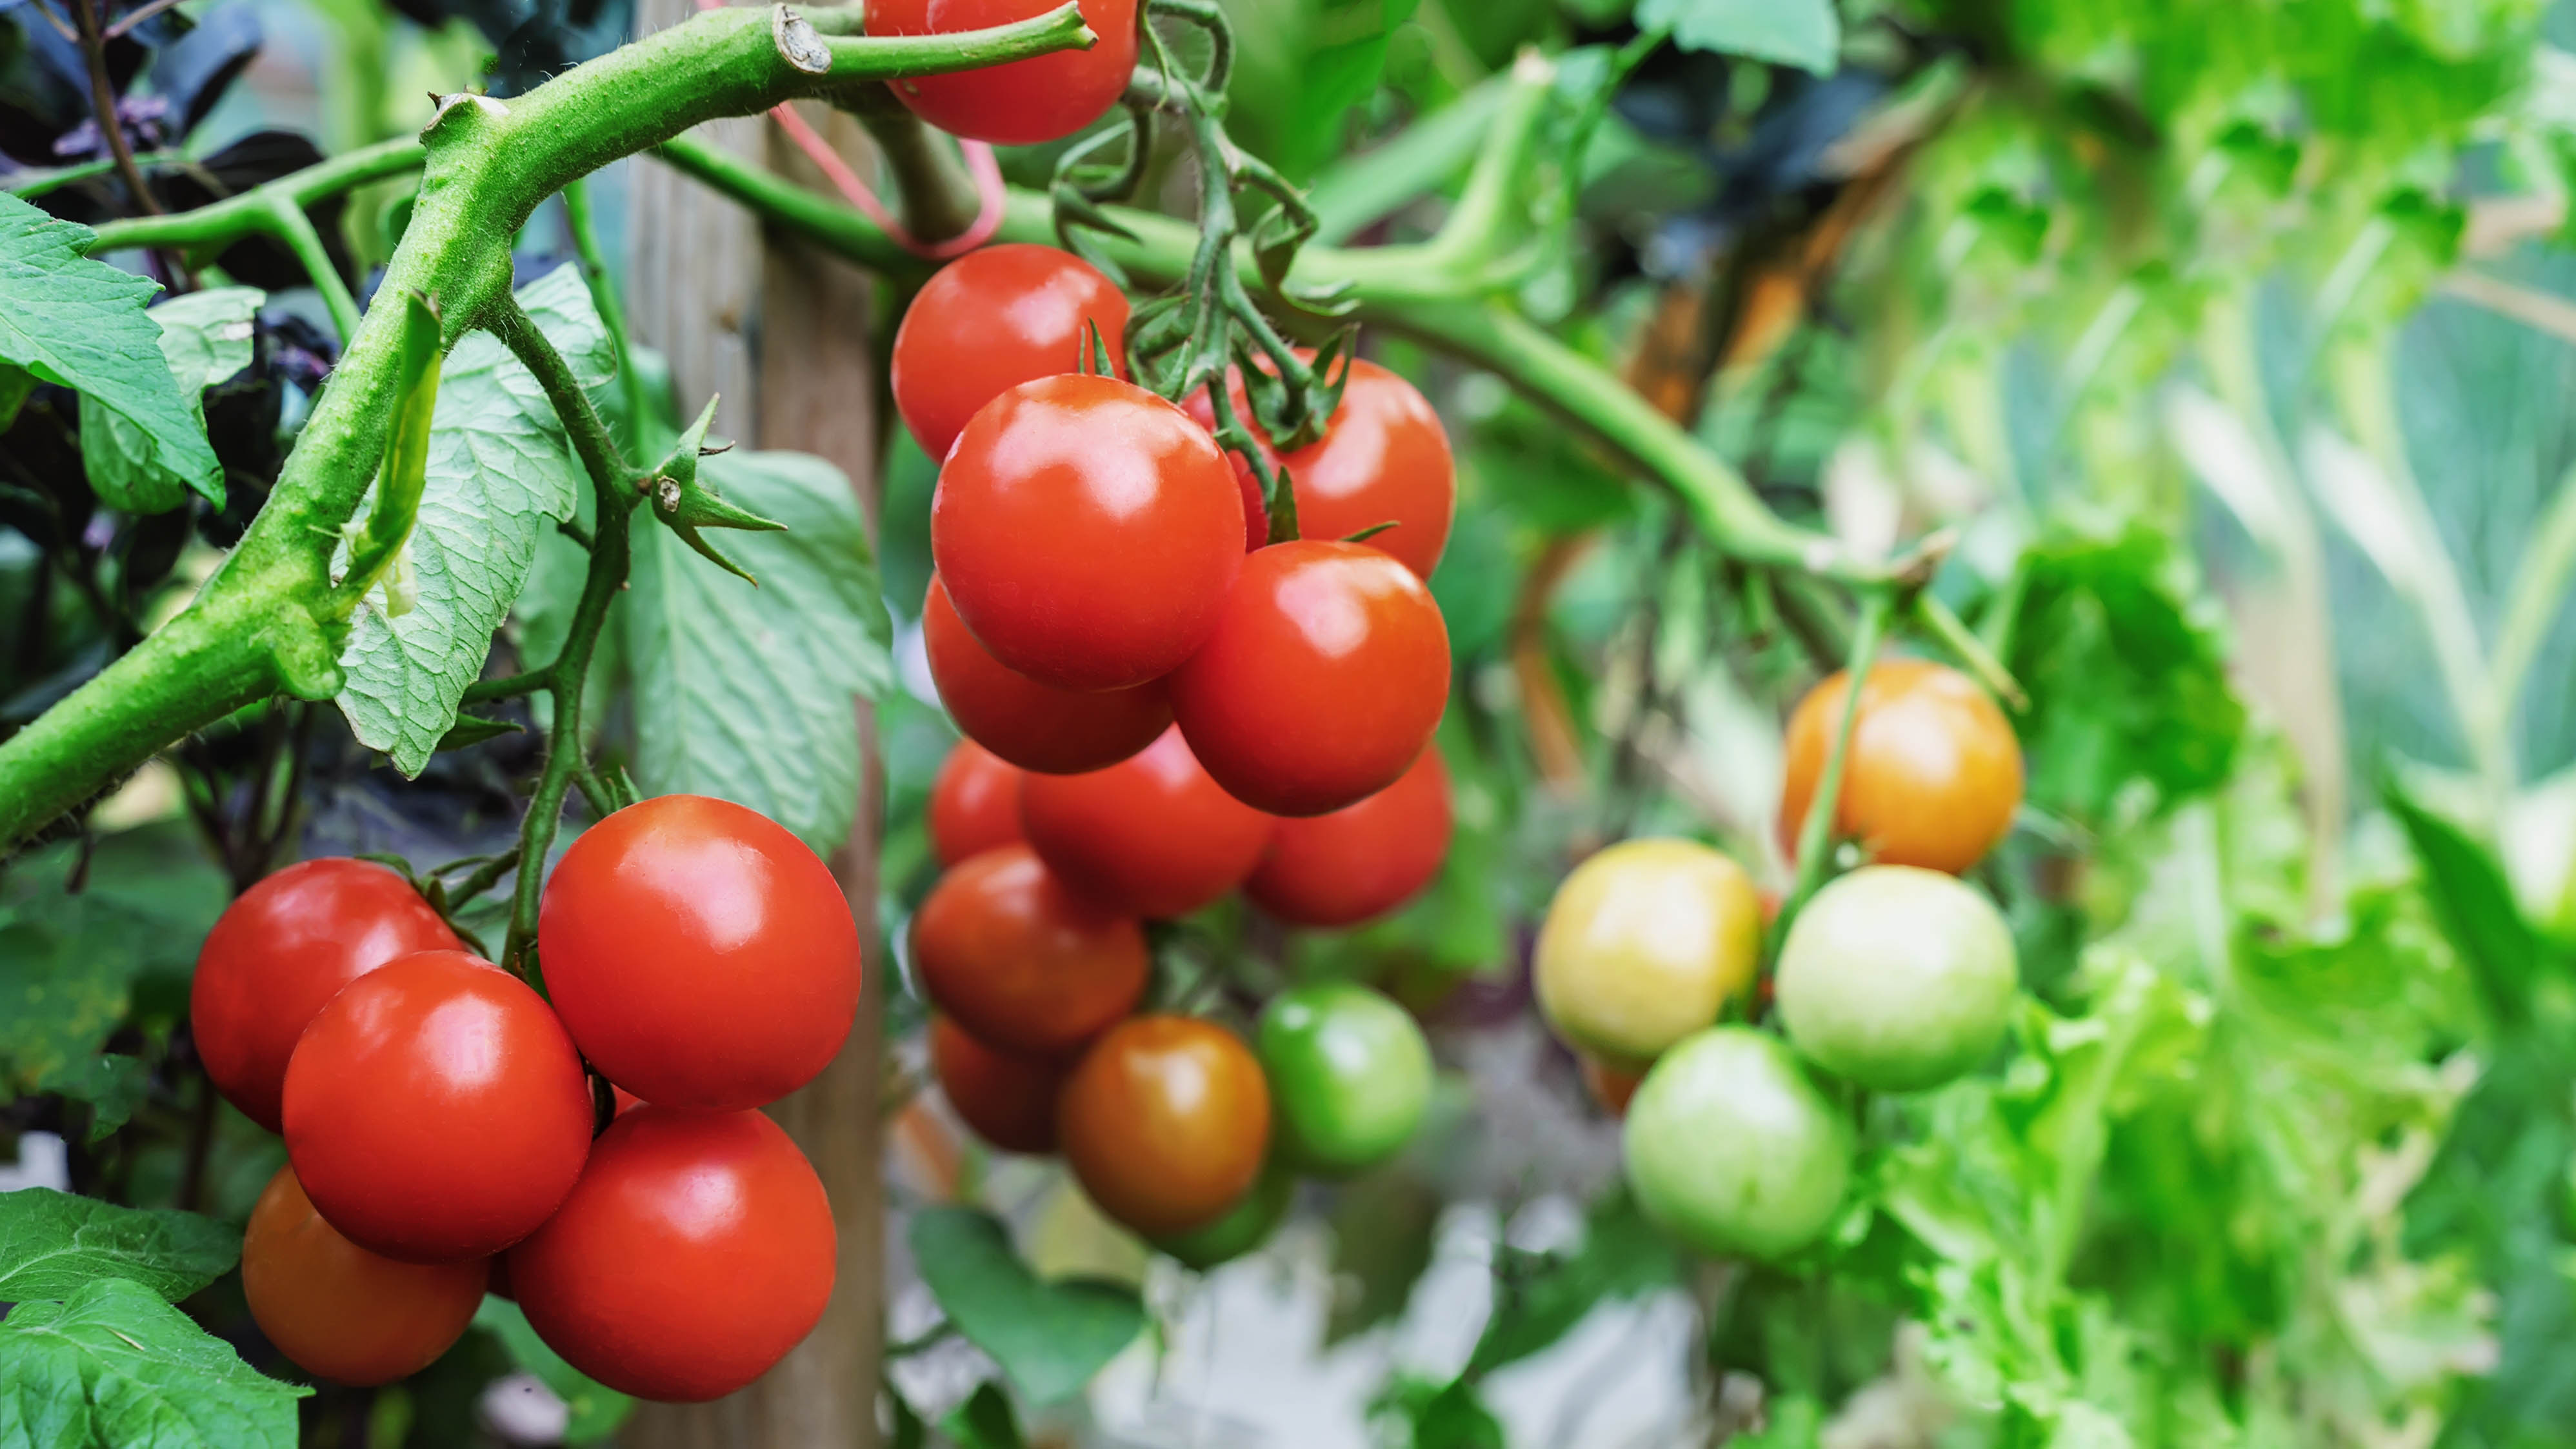 7 top tips for growing juicy tomatoes